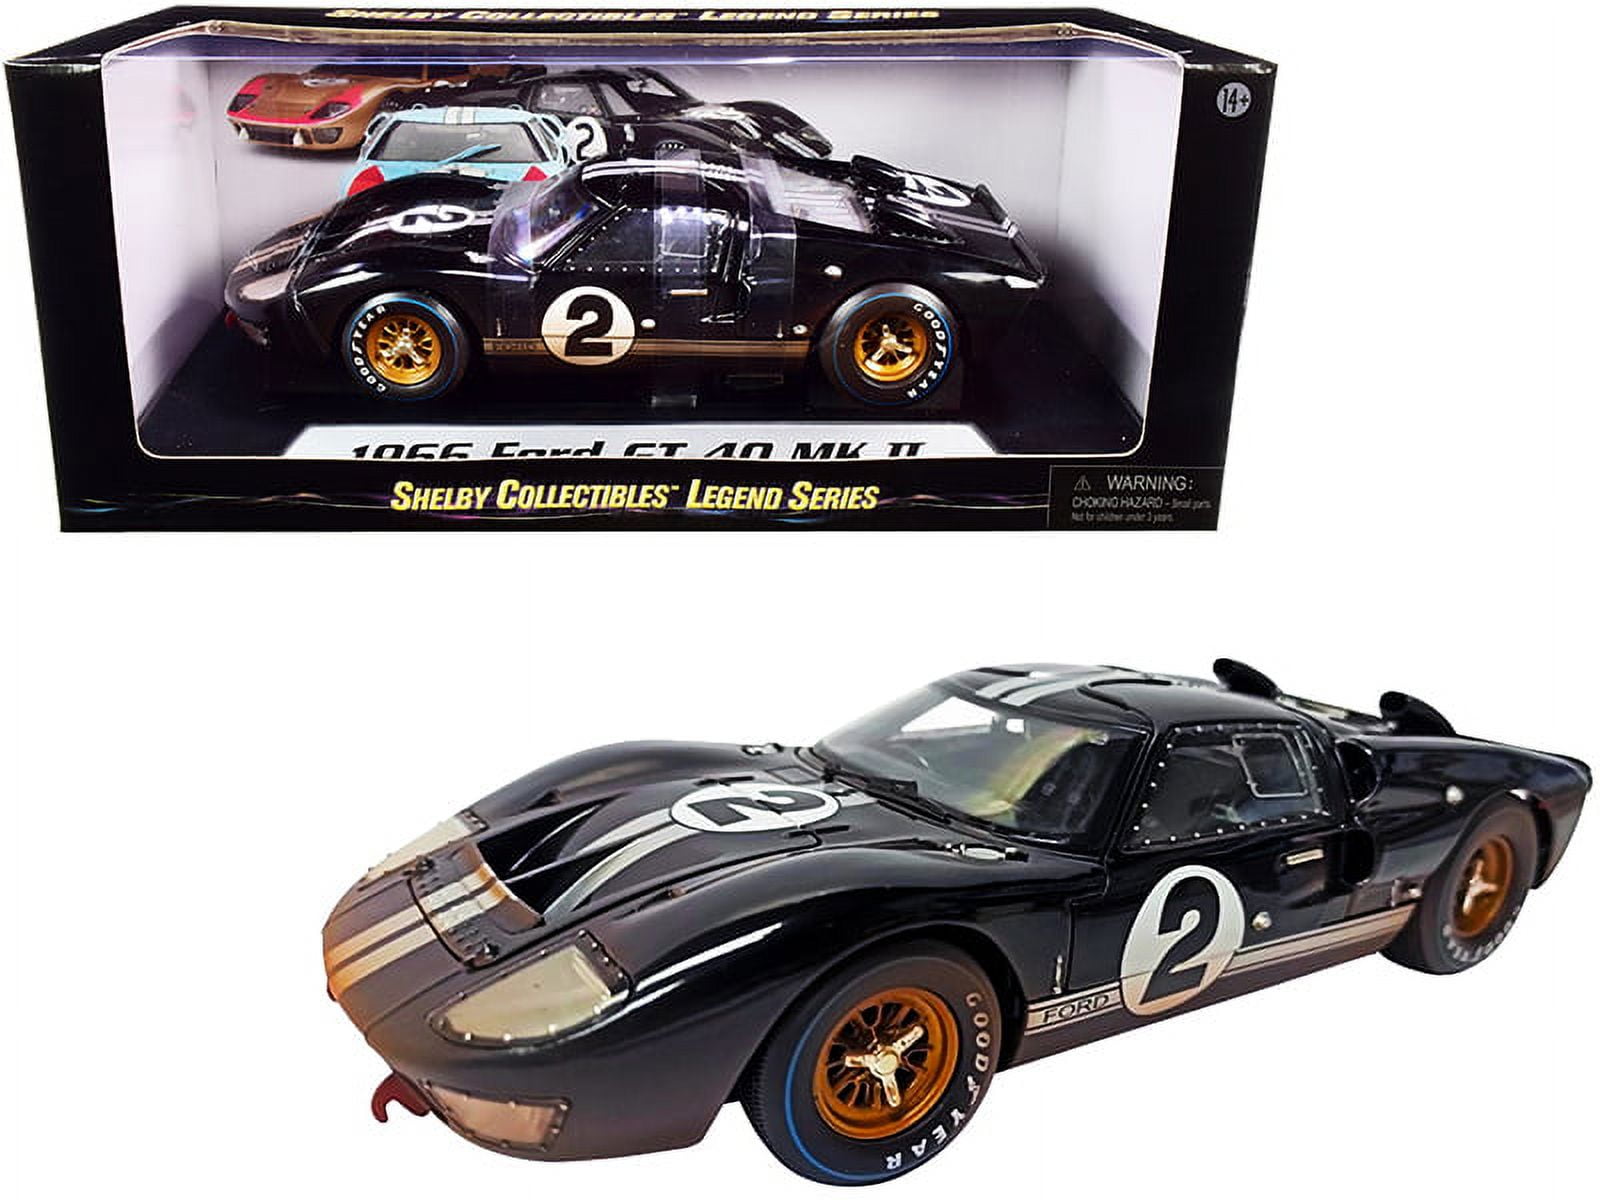 SC431 1966 Ford GT-40 MK II No.2 Black with Silver Stripes After Race Dirty Version 1 by 18 Scale Diecast Model Car -  SHELBY COLLECTIBLES